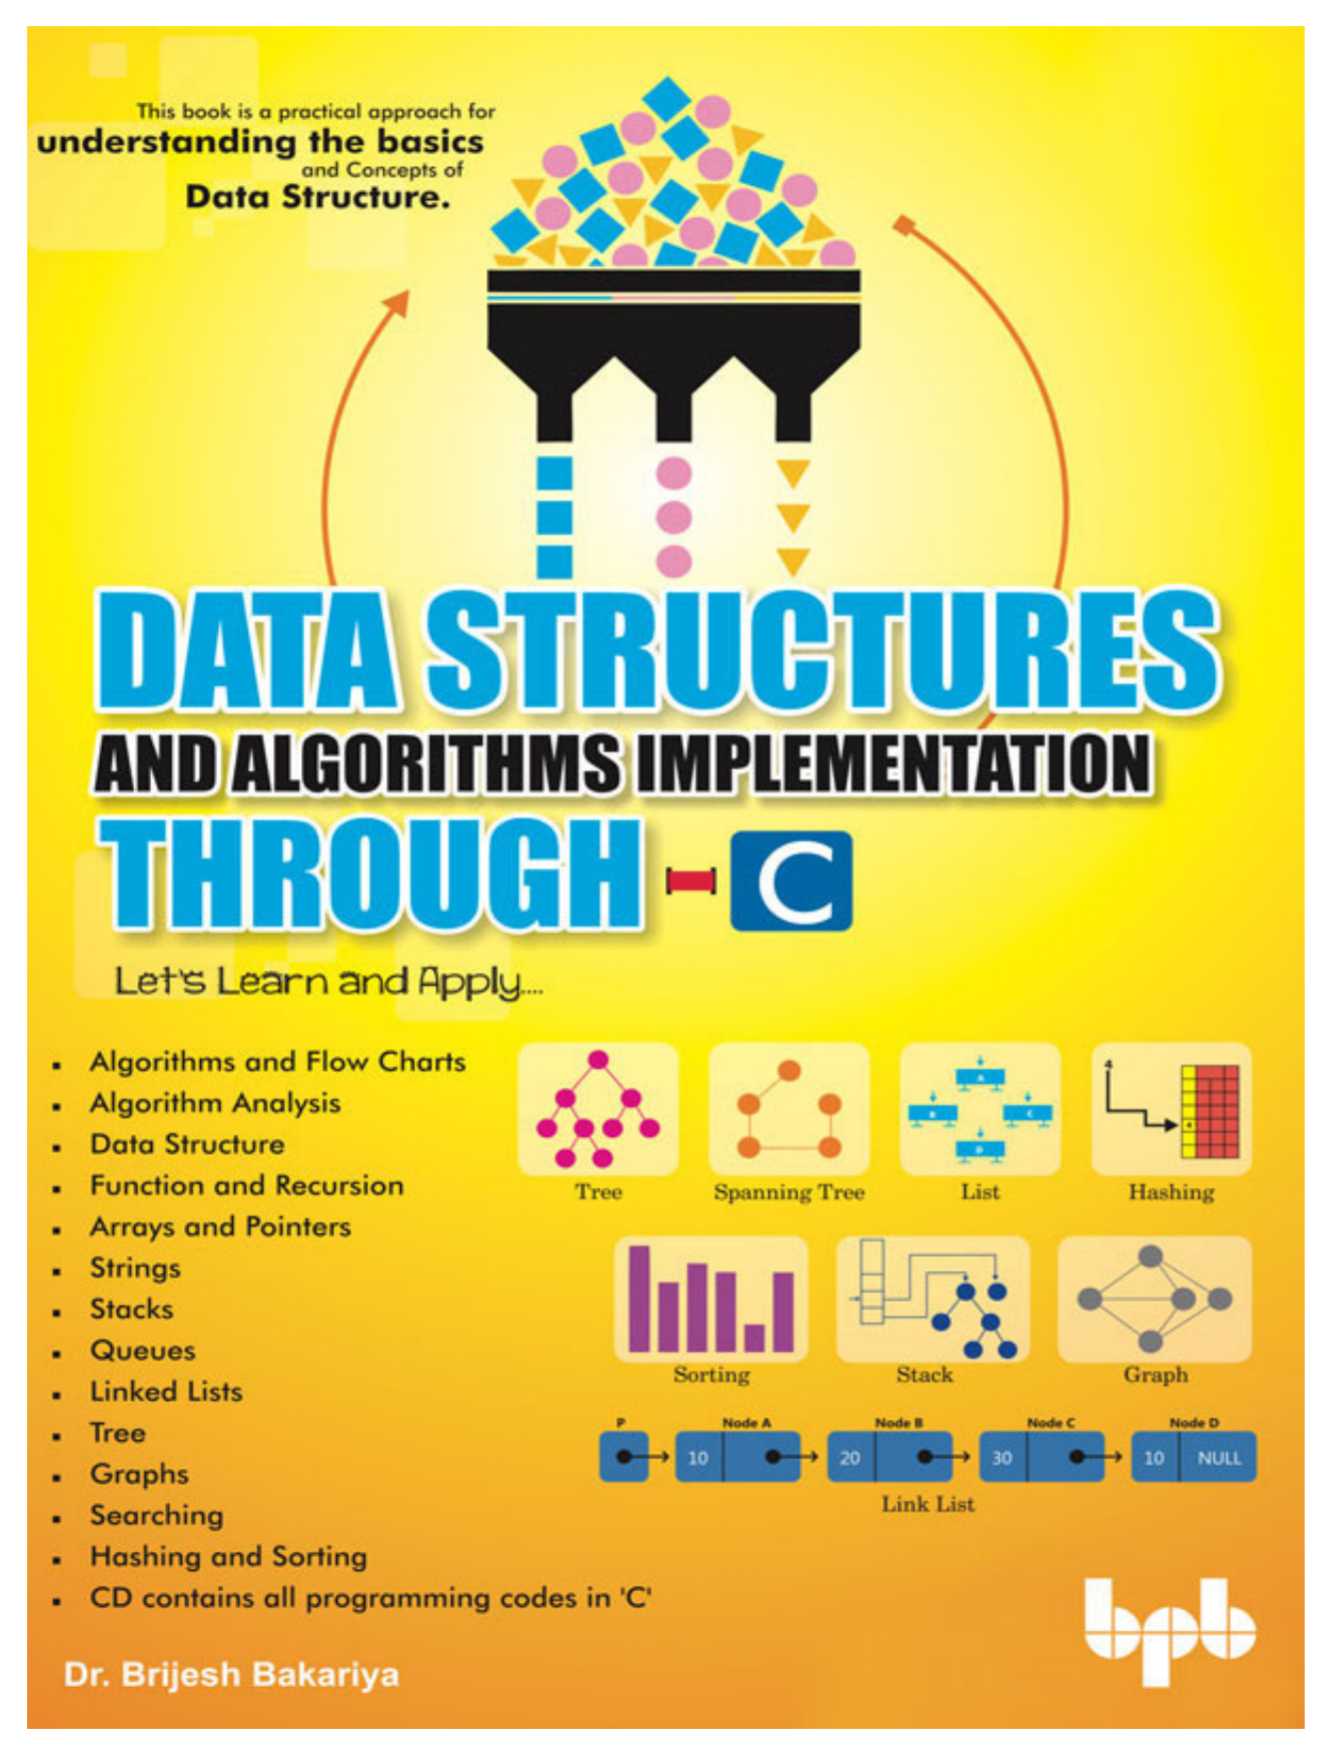 Data Structure And Algorithm Implementation Through C: Let’s Learn and Apply